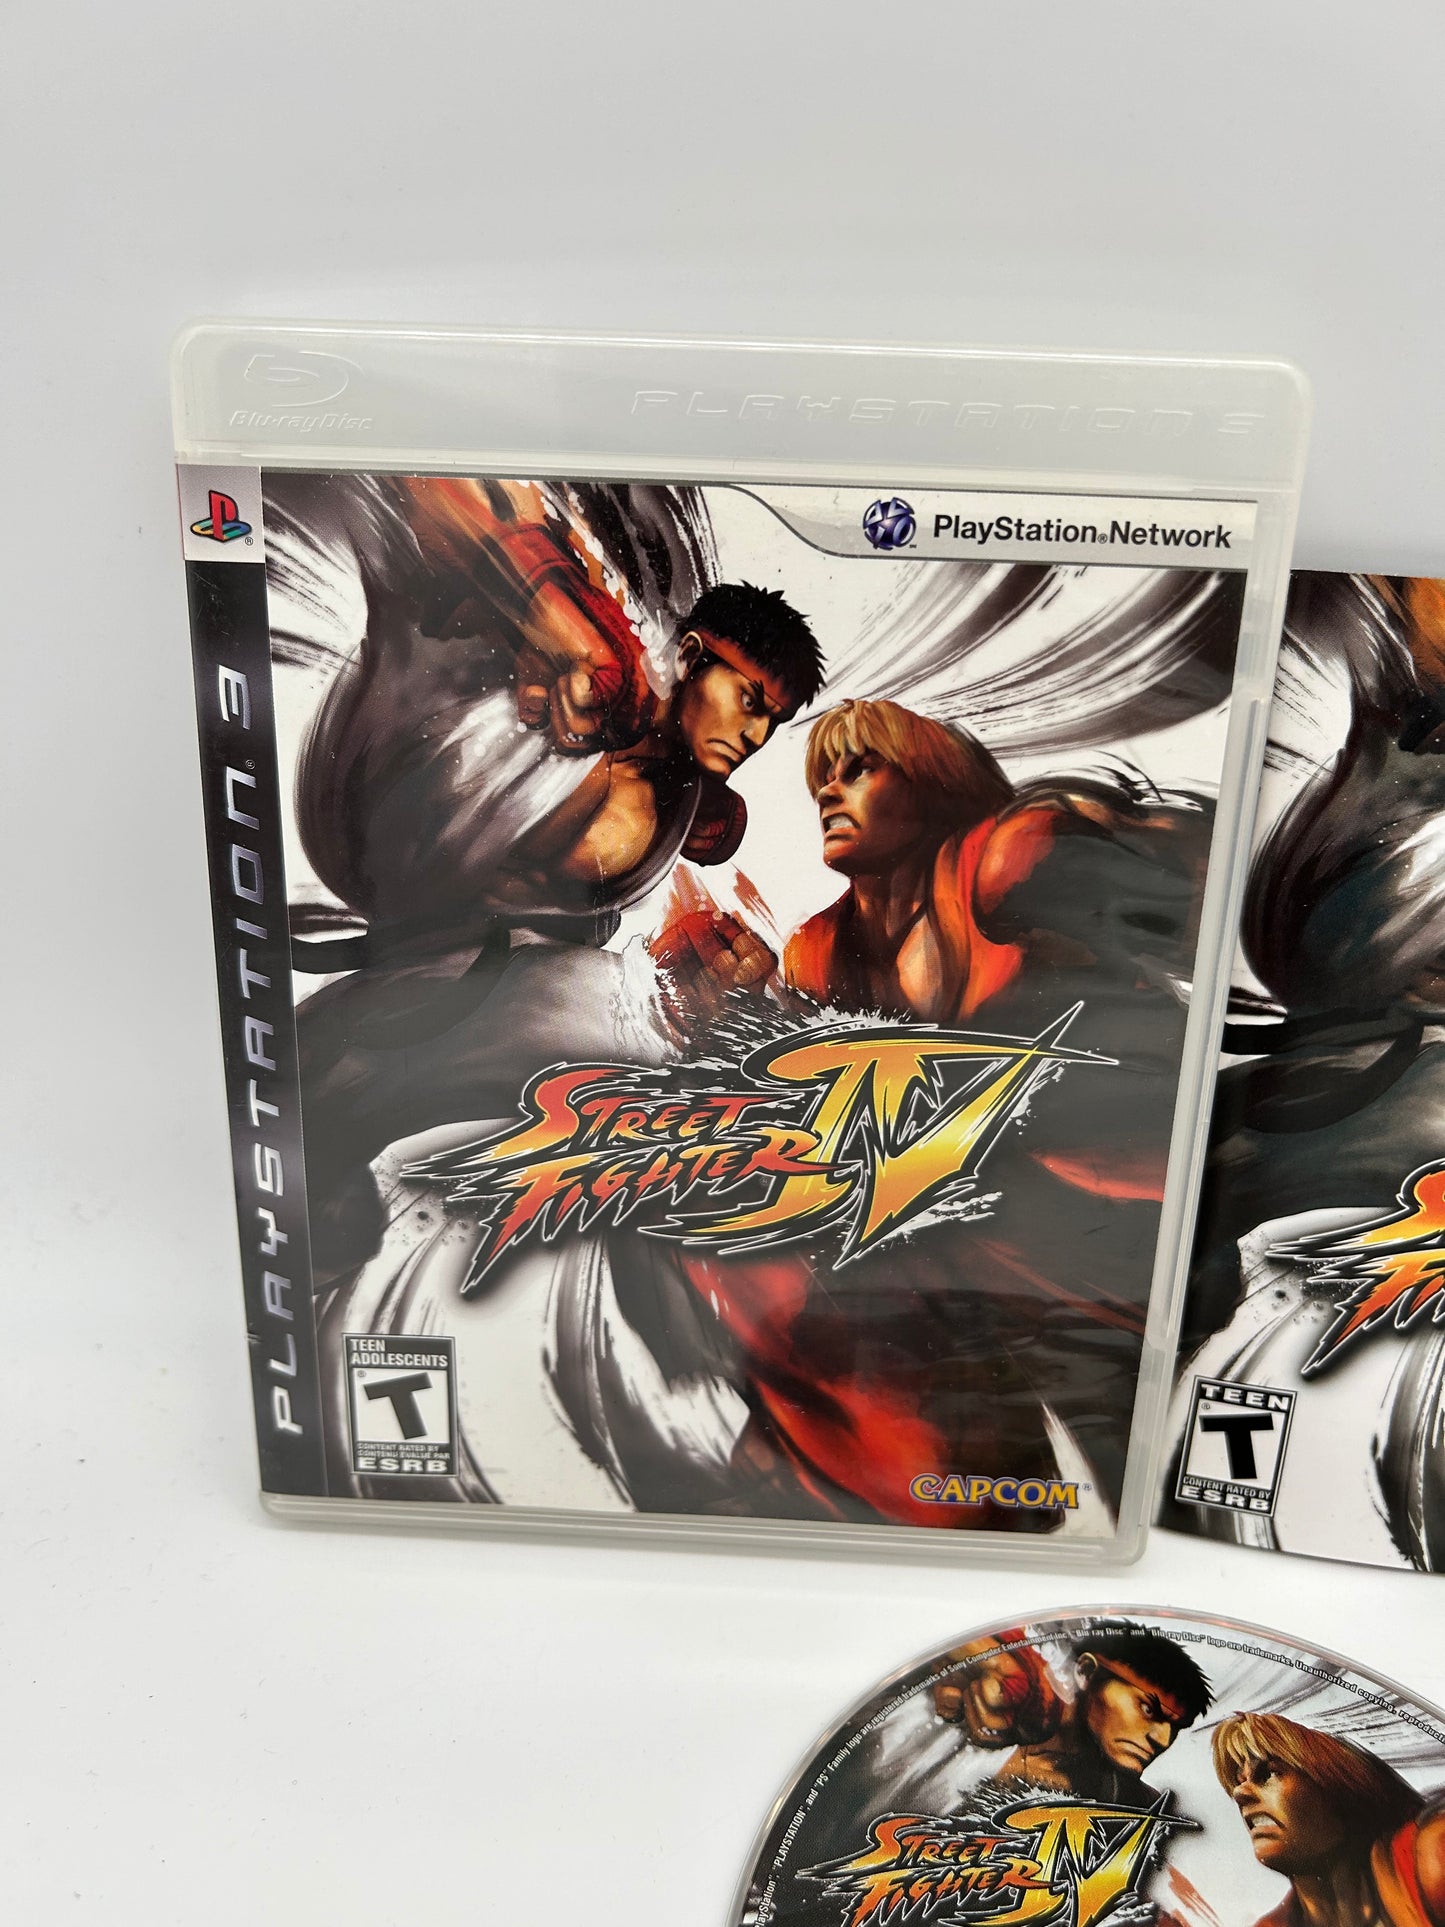 SONY PLAYSTATiON 3 [PS3] | STREET FIGHTER IV